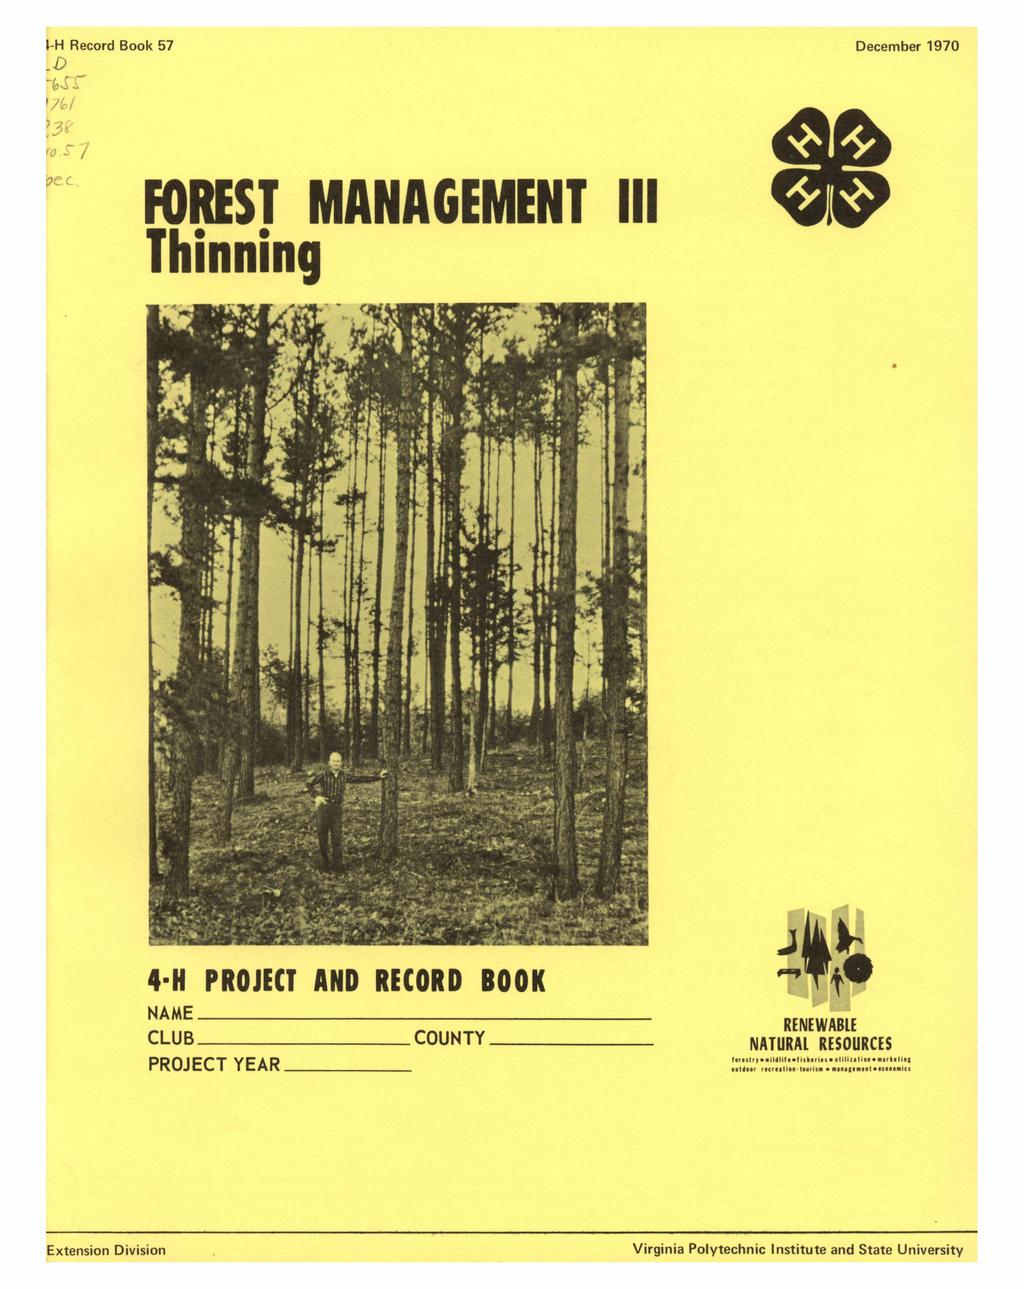 Record Book 57 December 1970 I FOREST MANAGEMENT Ill Thinning 4 H PROJECT AND RECORD BOOK NAME~~~~~~~~~~~~~~~ CLUB ~~~~~~-COUNTY~~~~~- PROJECT YEAR RENEWABLE NATURAL